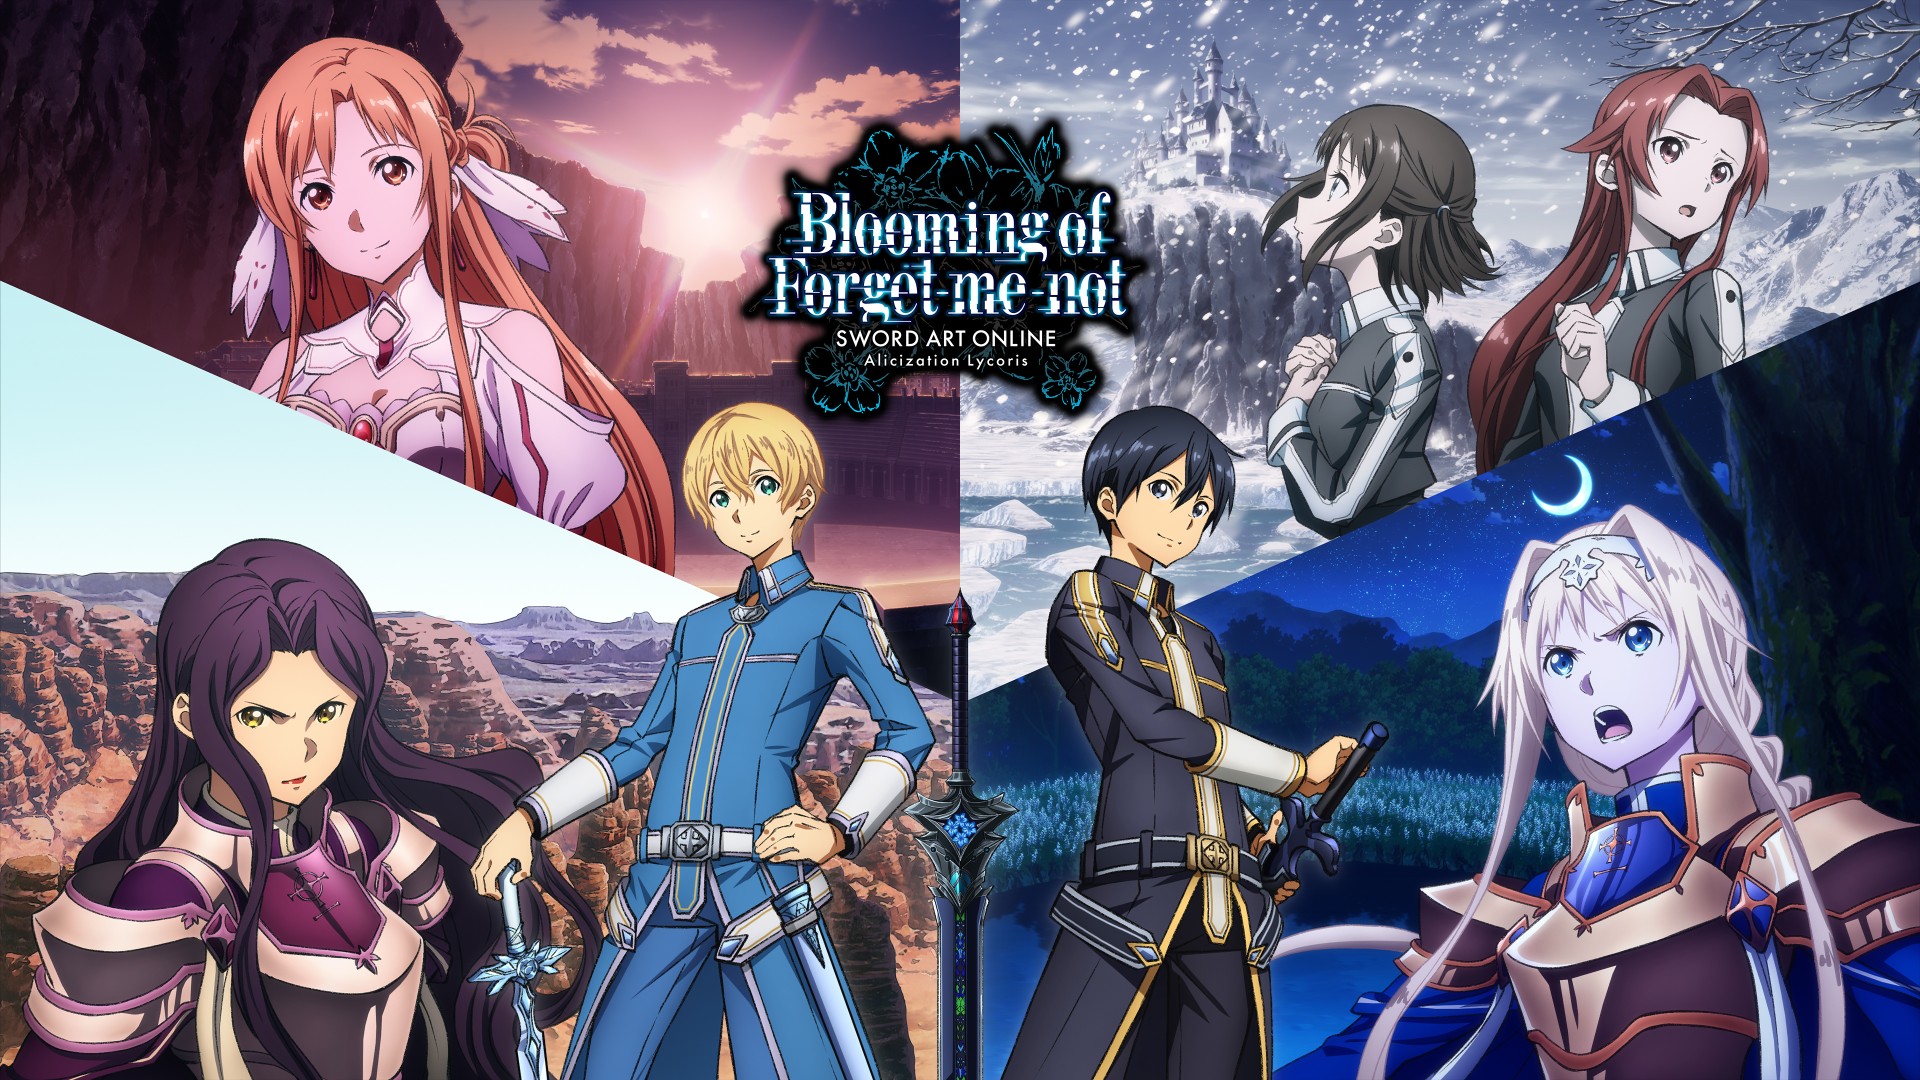 Video For The First Major DLC for Sword Art Online Alicization Lycoris is Out Now